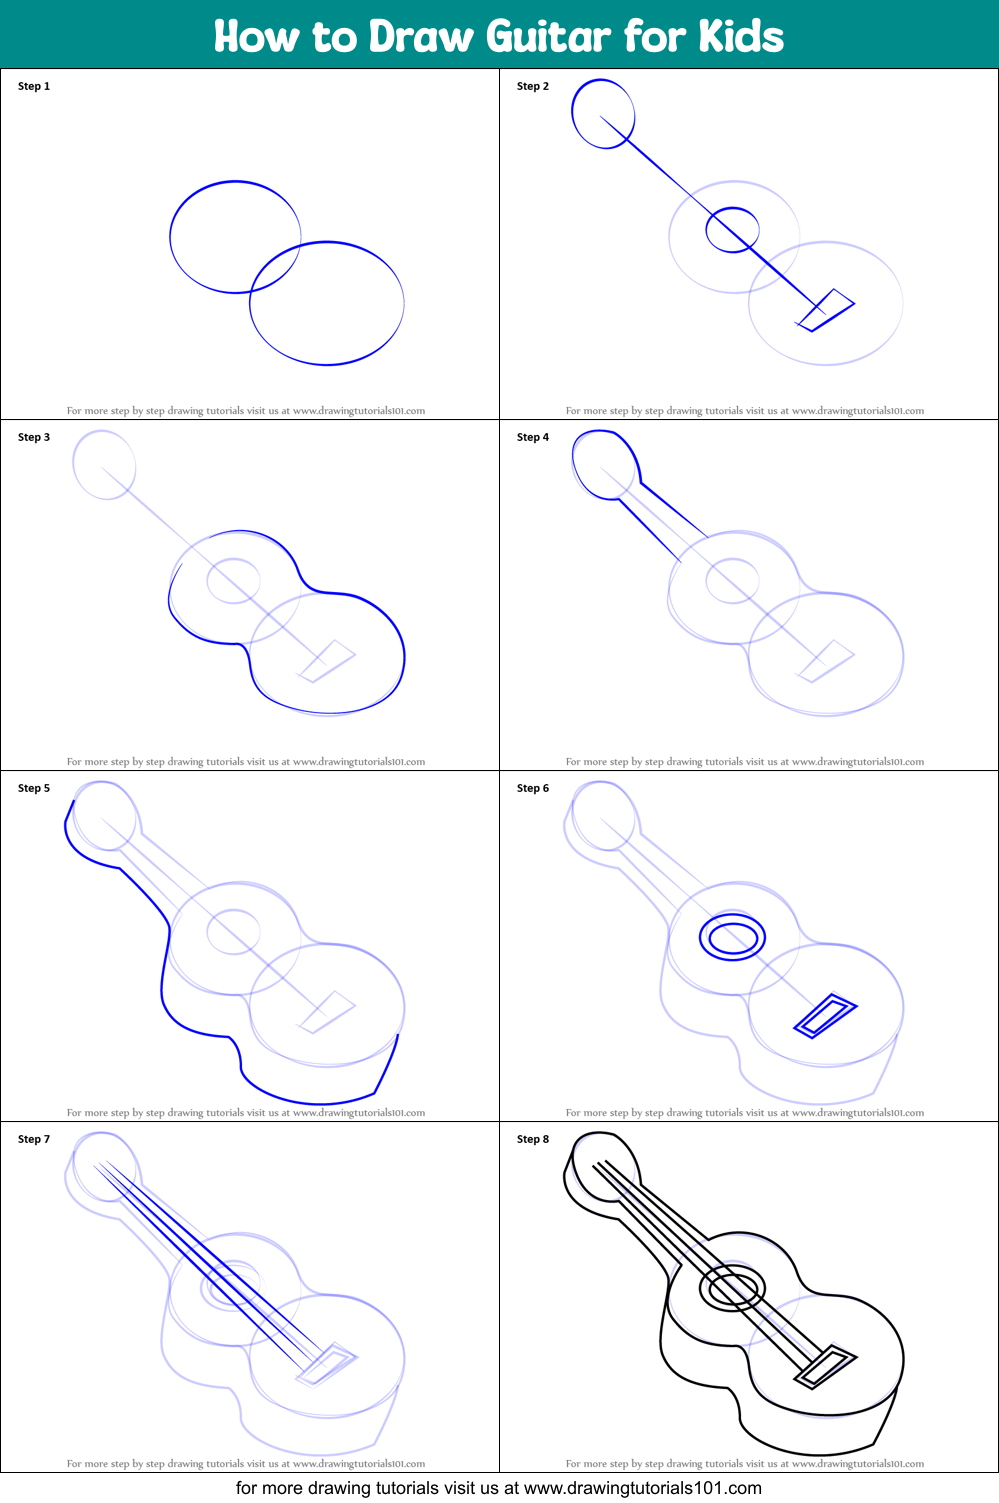 How to Draw Guitar for Kids printable step by step drawing